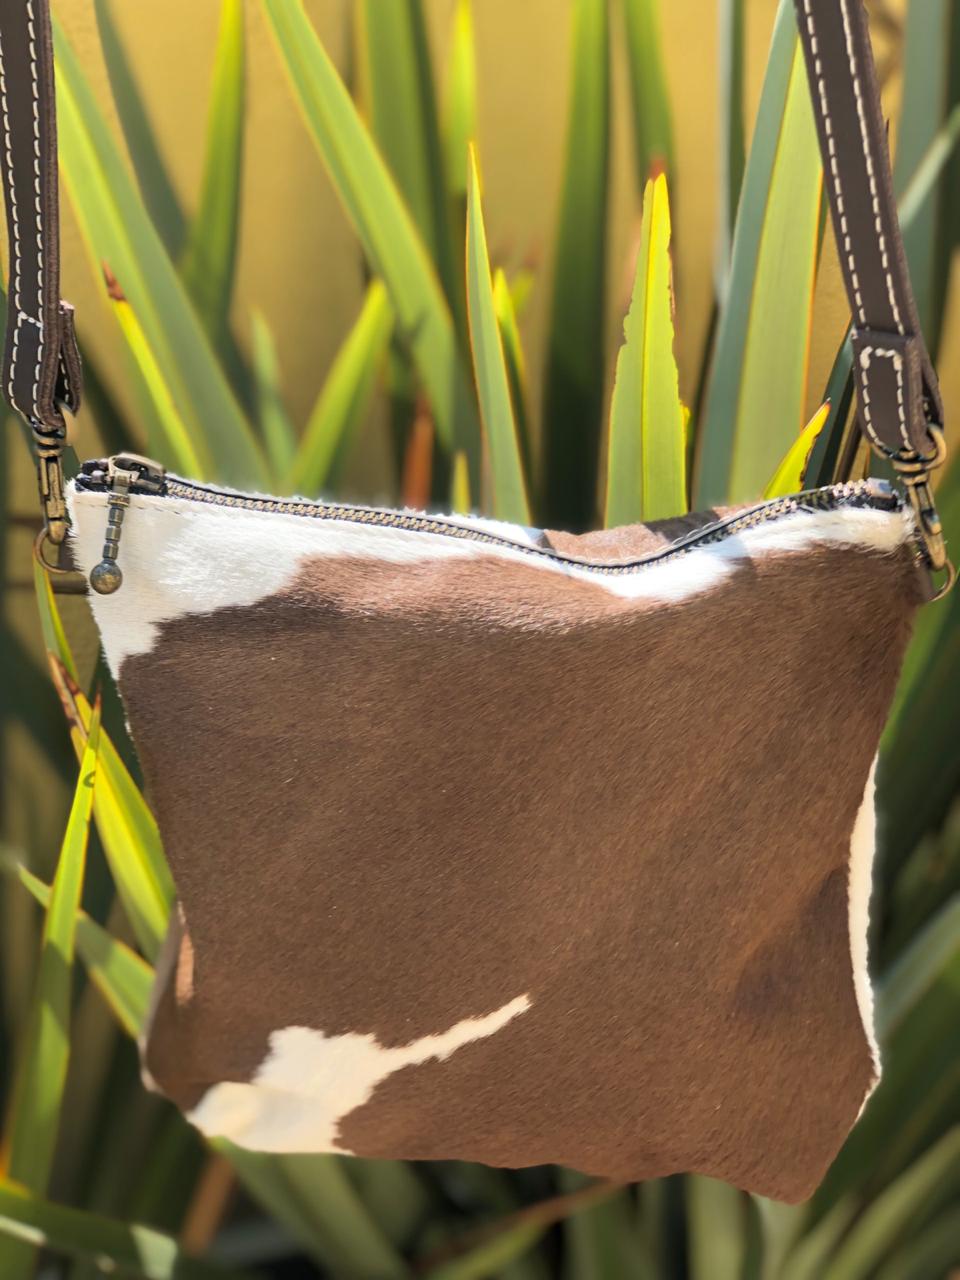 The Baja Crossbody Bag - Cowhide and leather